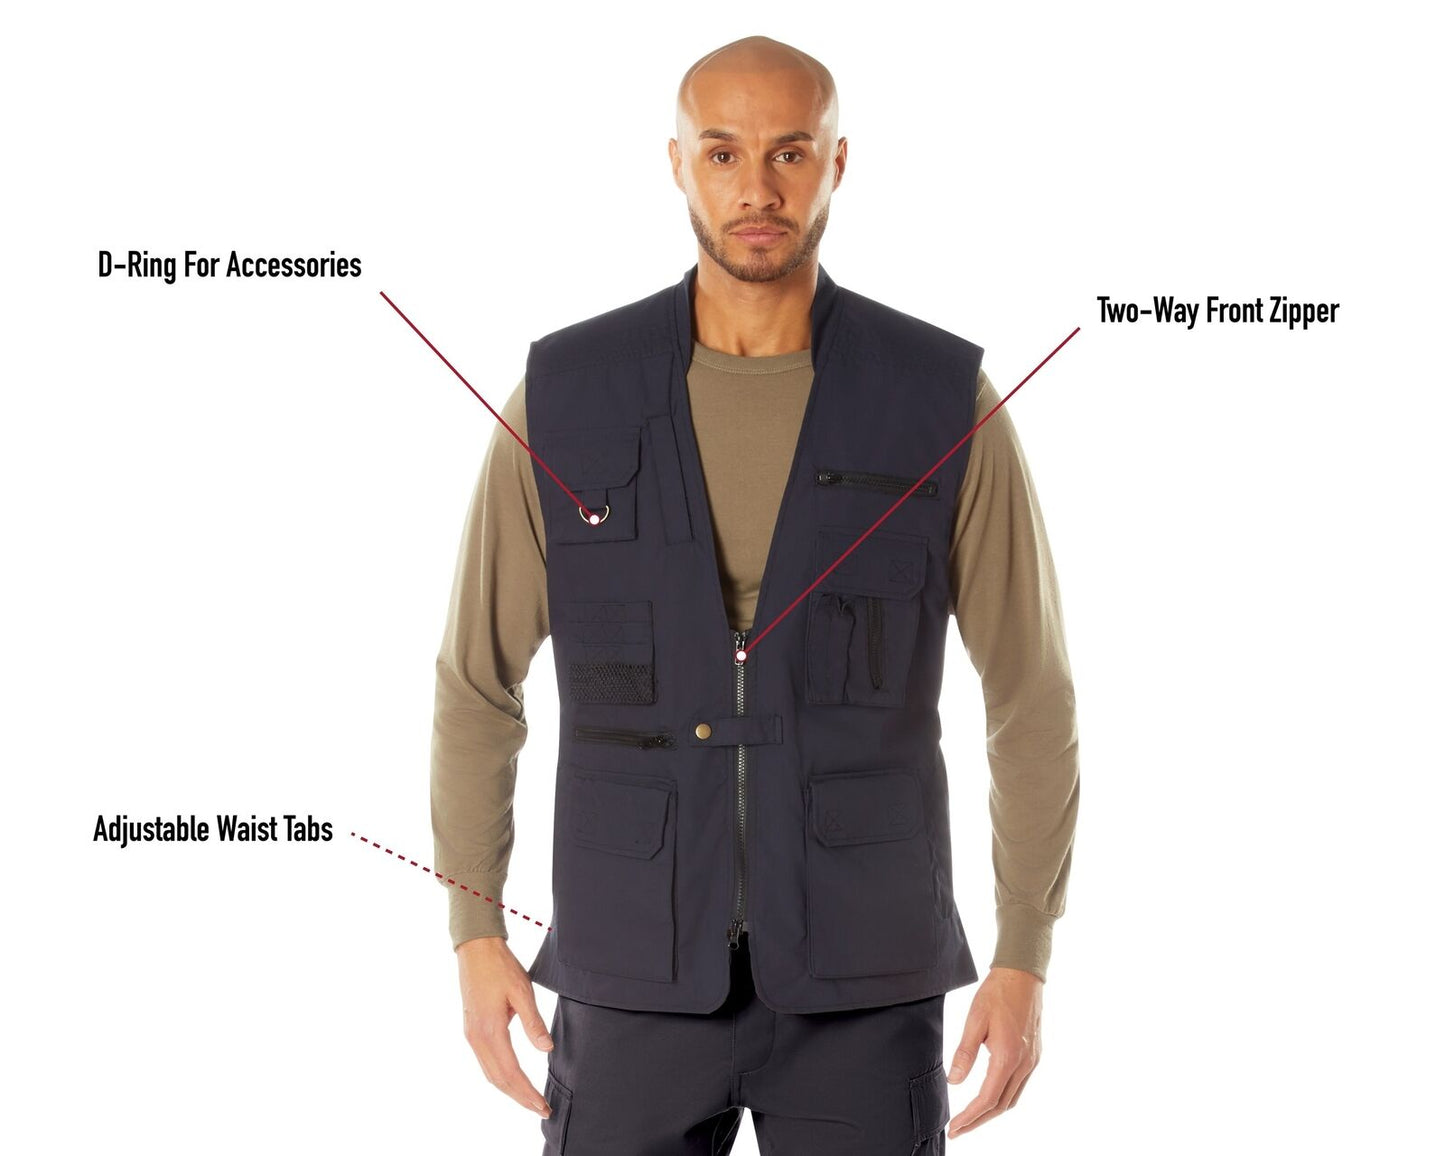 Men's Plainclothes Concealed Carry Vest in Midnight Navy Blue